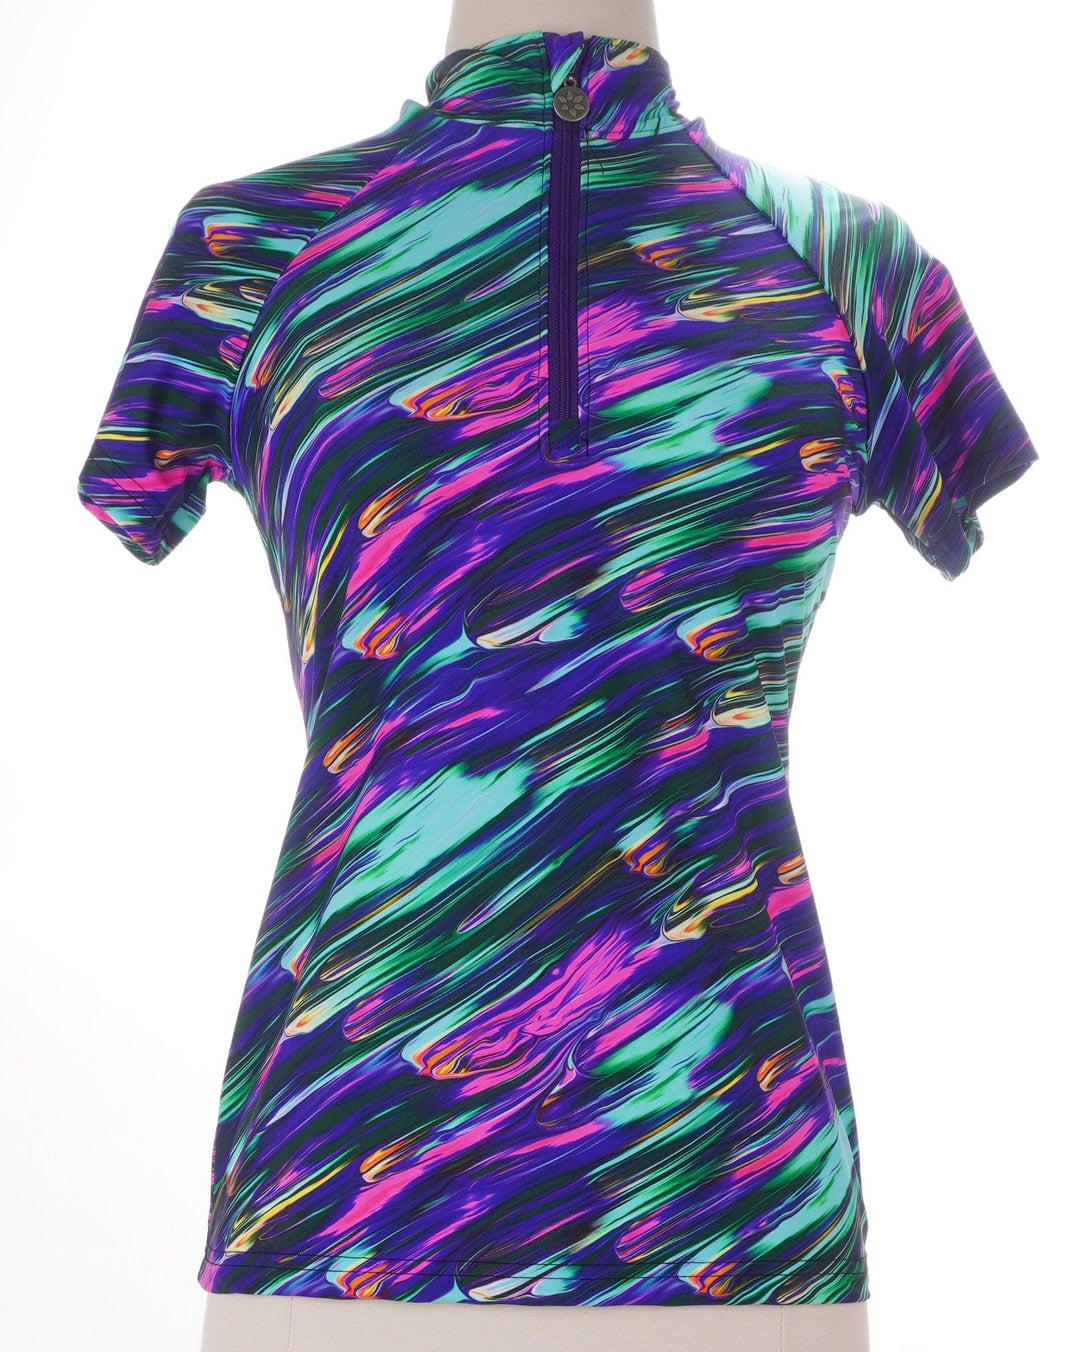 Tzu Tzu Multicolored / X-Small / Exclusive New Product Tzu Tzu Lucy Short Sleeve Top - Northern Lights - Size X-Small